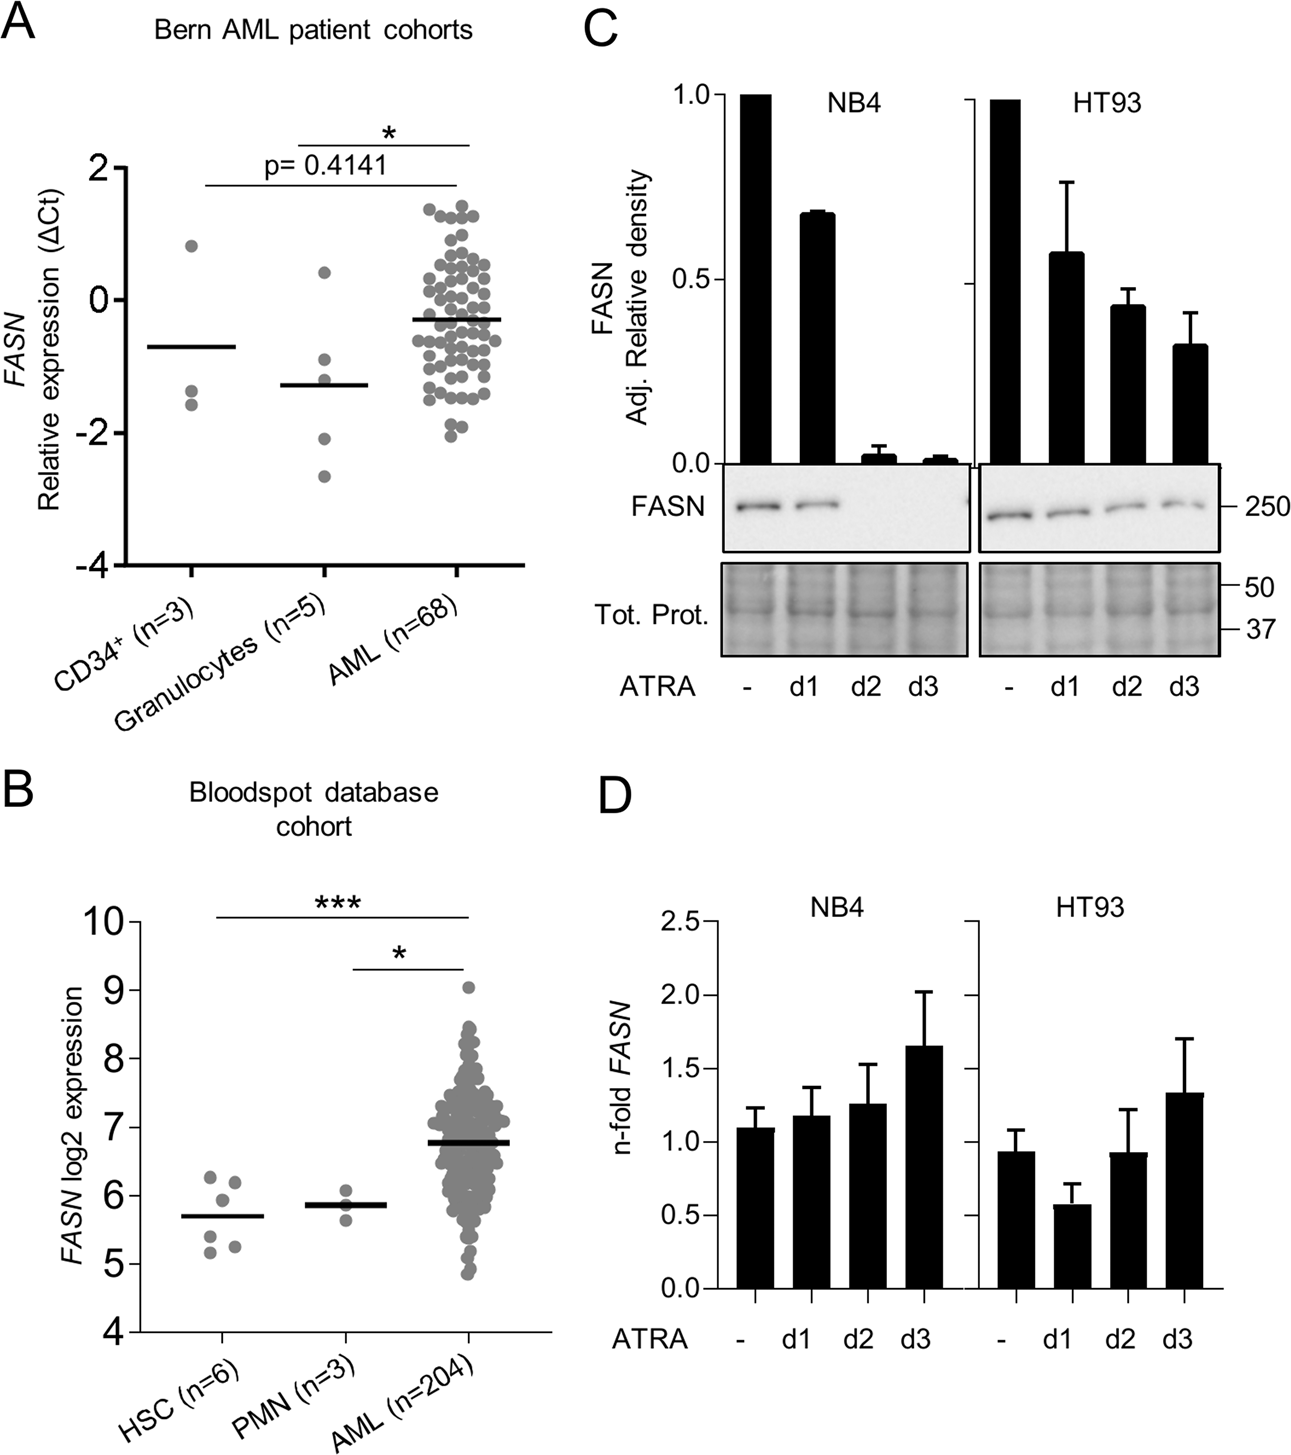 Reducing FASN expression sensitizes acute myeloid leukemia cells to  differentiation therapy | Cell Death & Differentiation